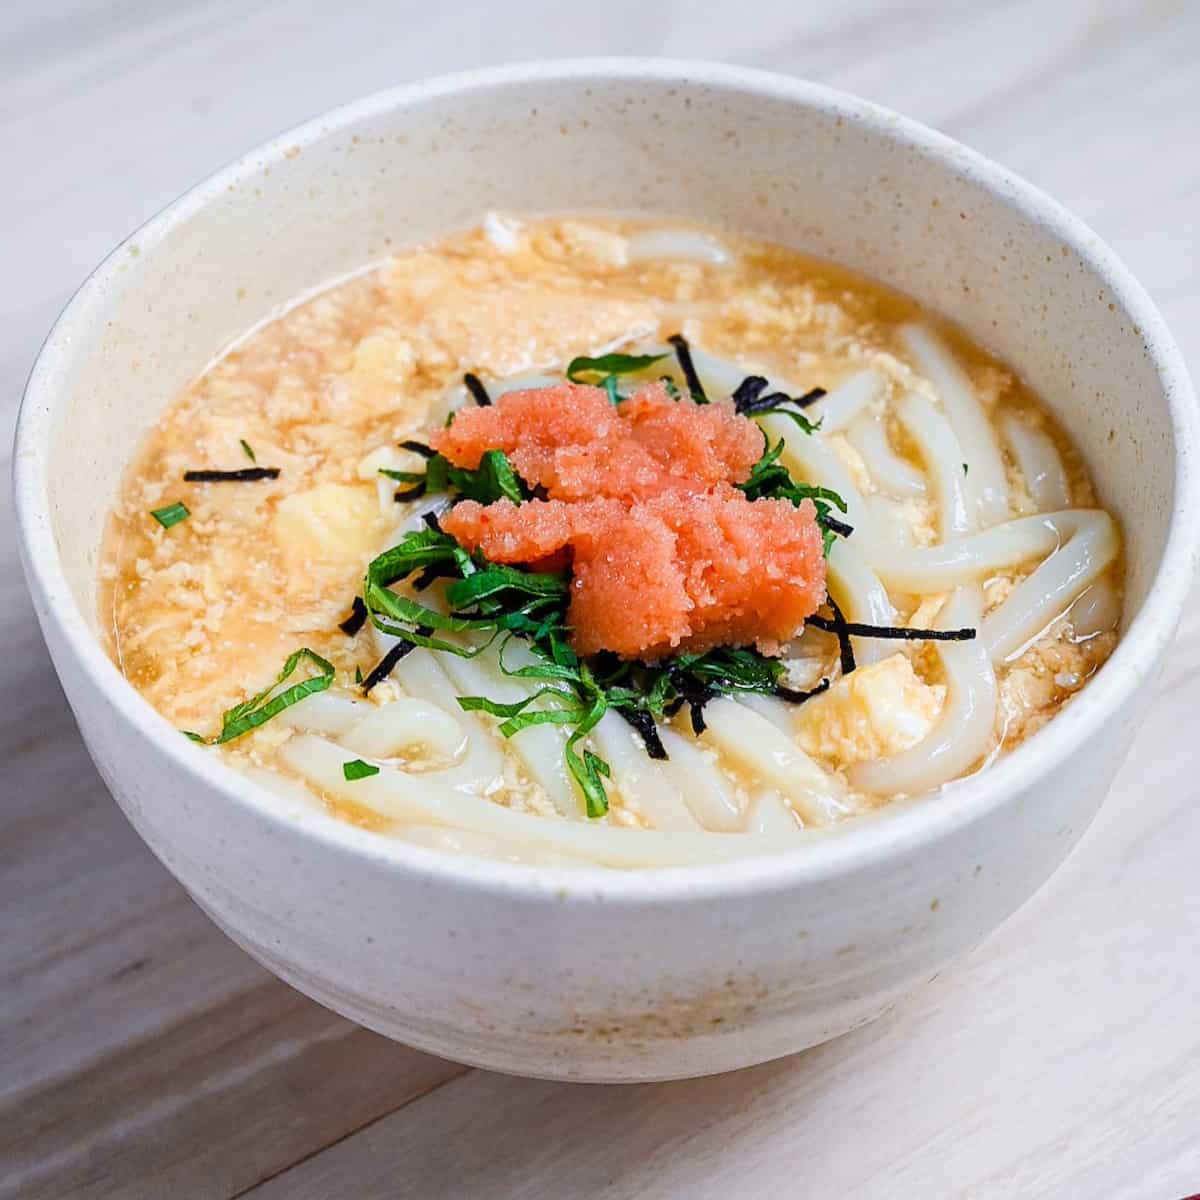 Mentaiko ankake udon served in a cream bowl and topped with shiso leaves. featured image